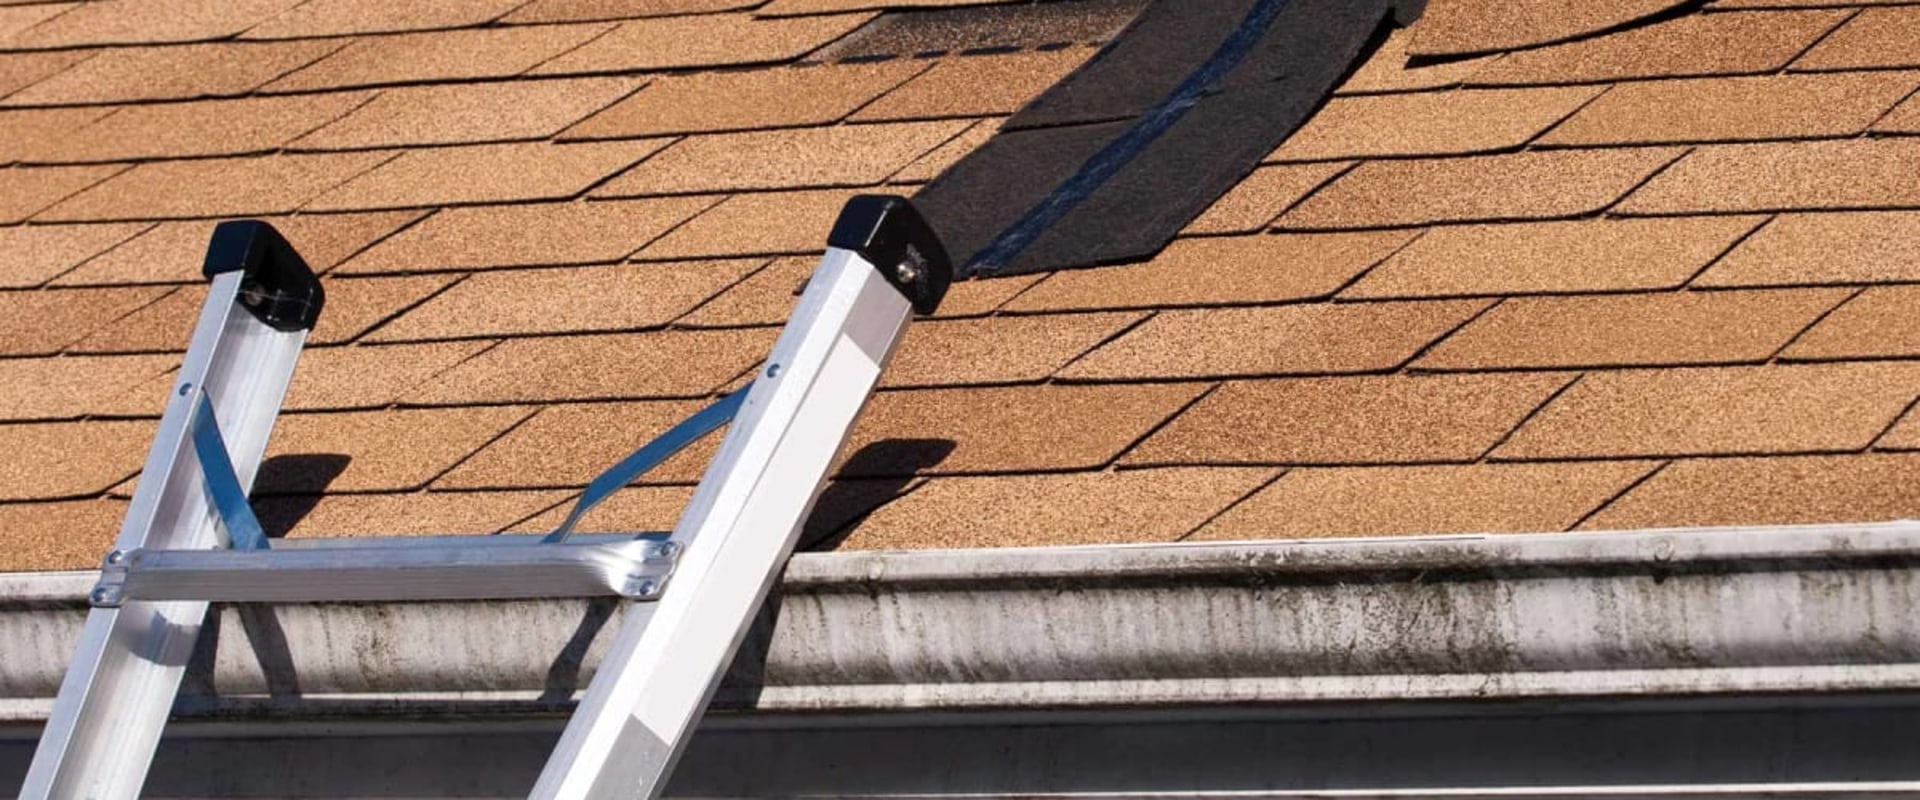 Costs and Maintenance Considerations for Asphalt Shingles